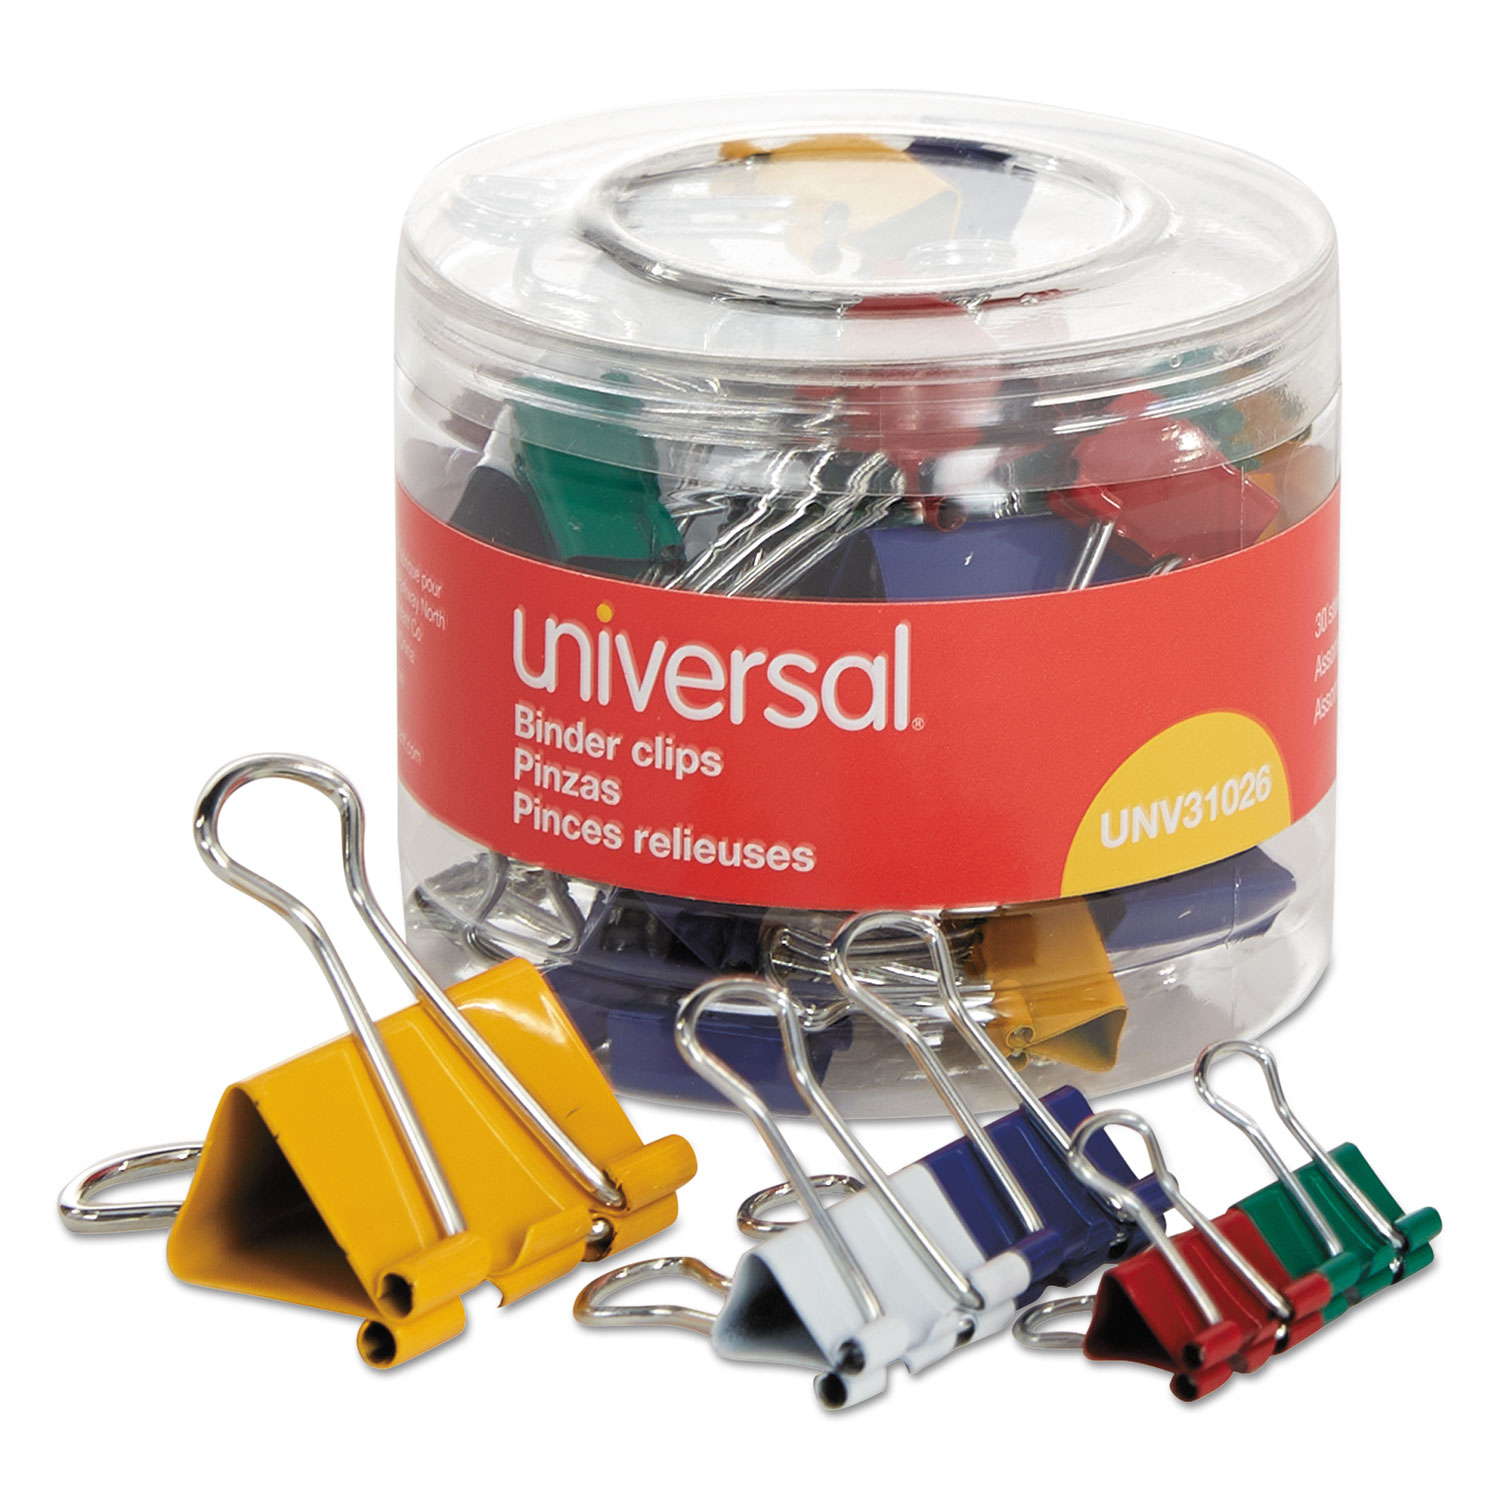  Universal UNV31026 Binder Clips in Dispenser Tub, Assorted Sizes and Colors, 30/Pack (UNV31026) 